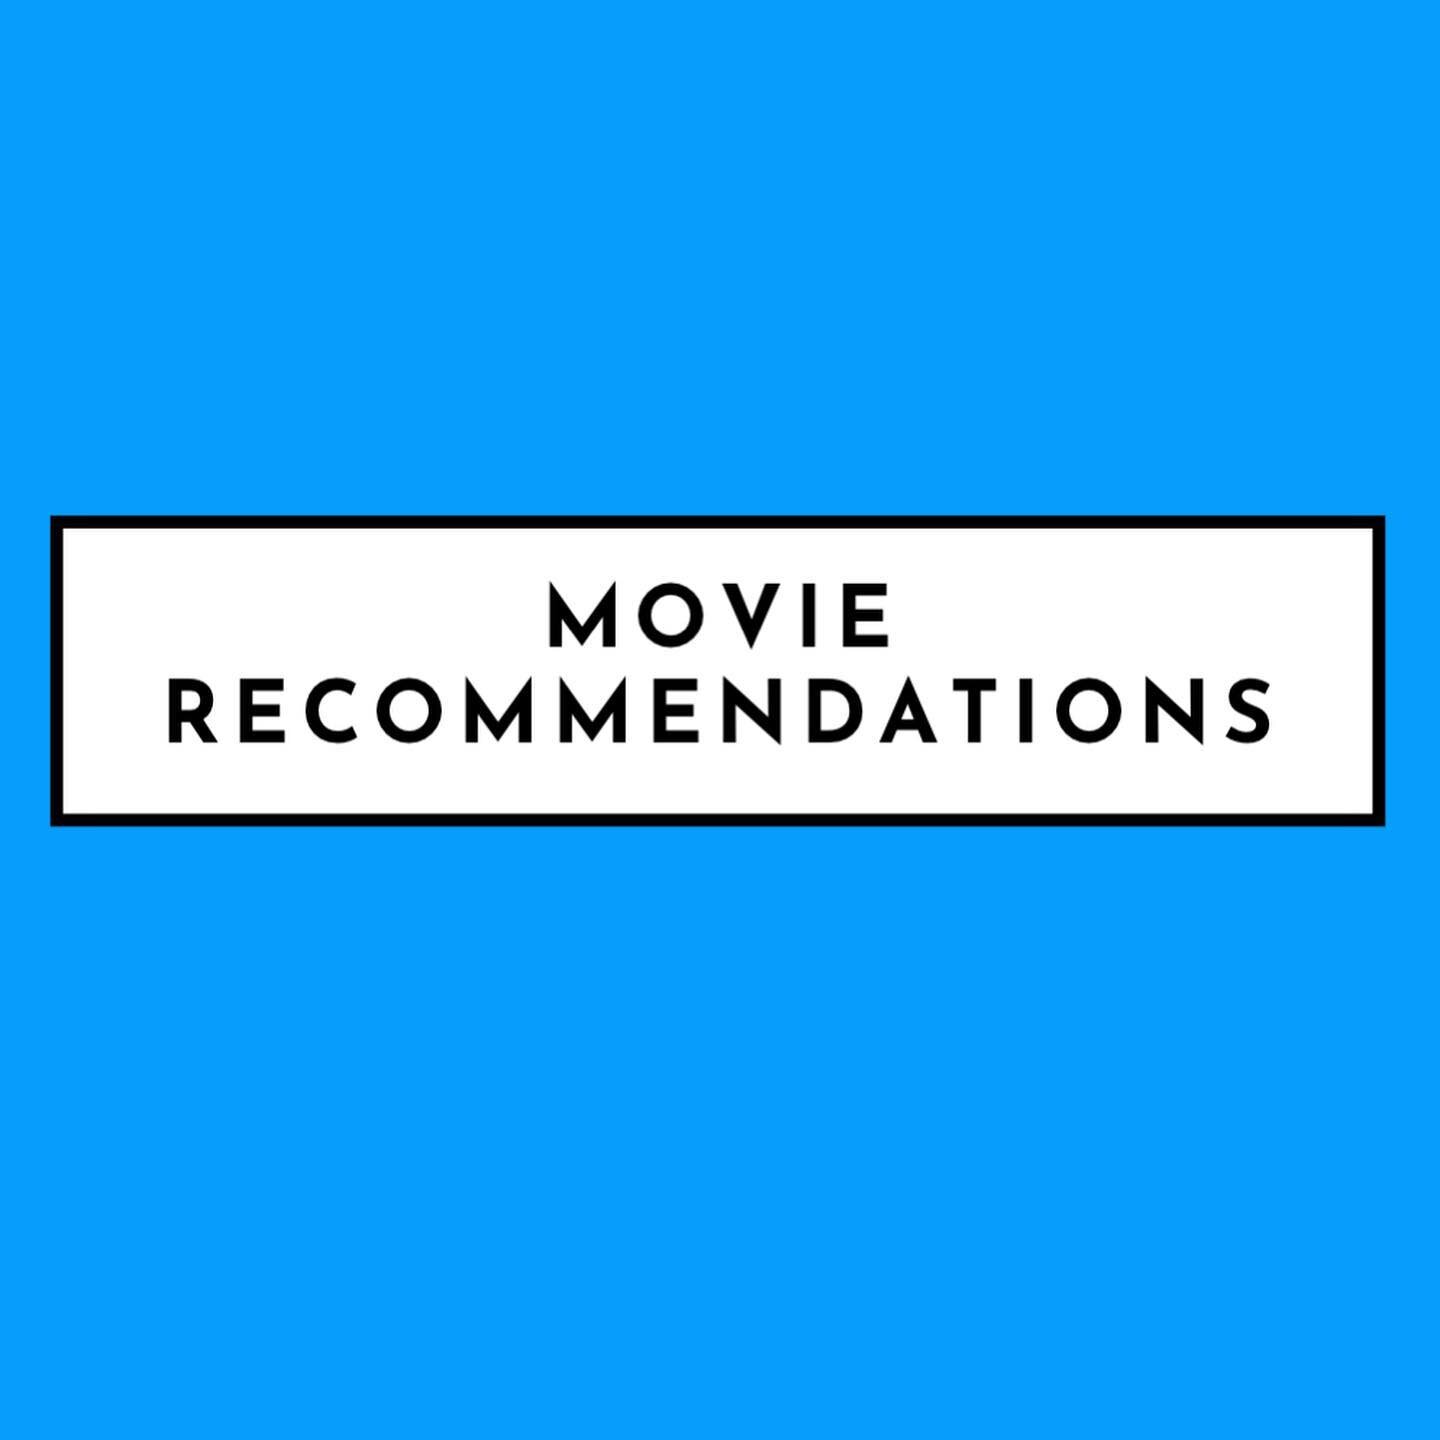 Movies with an uncommon perspective. From Dead Poets Society to Hacksaw Ridge, here are some recommendations for you.

-Yours Uncommonly

#collegeapplications #collegeessay #collegeessentials #collegeadmissions #ivyleague #studyinusa #educationconsul